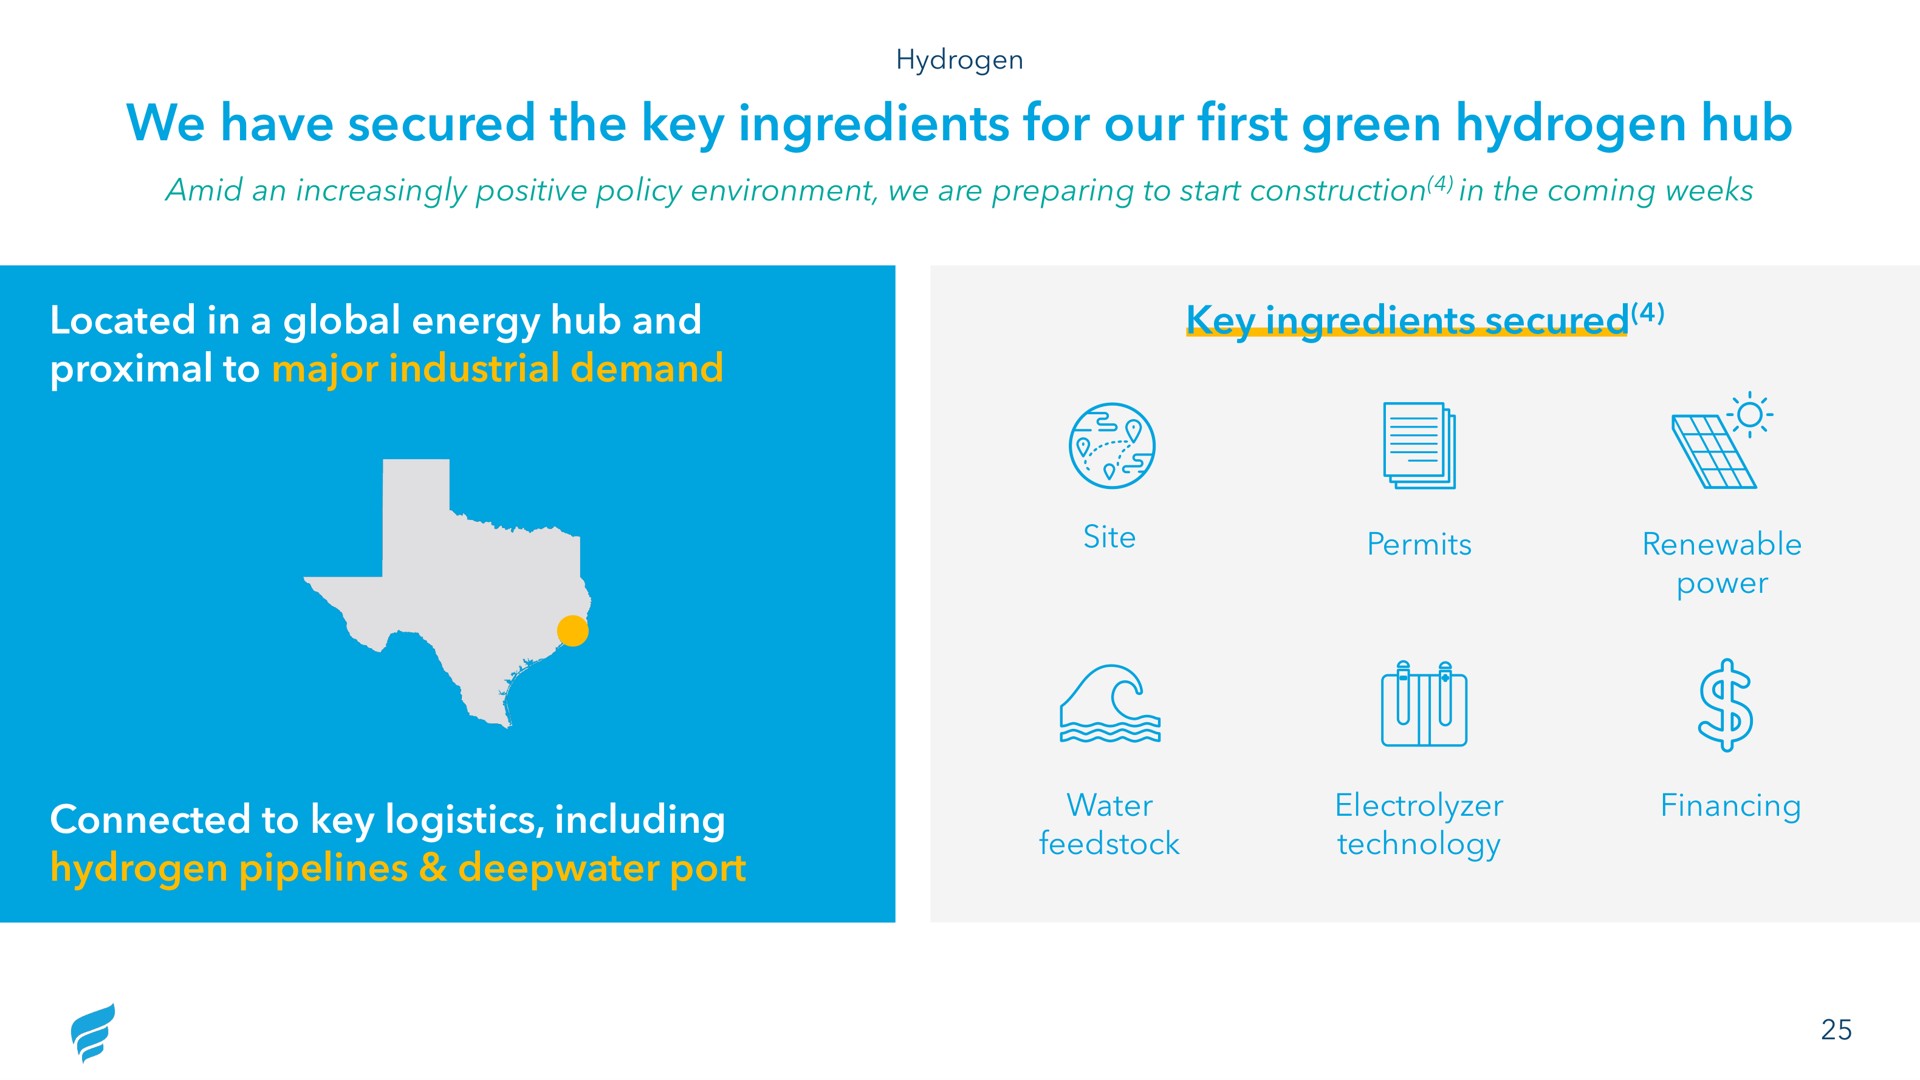 we have secured the key ingredients for our first green hydrogen hub located in a global energy hub and proximal to major industrial demand key ingredients secured connected to key logistics including hydrogen pipelines deepwater port permits | NewFortress Energy